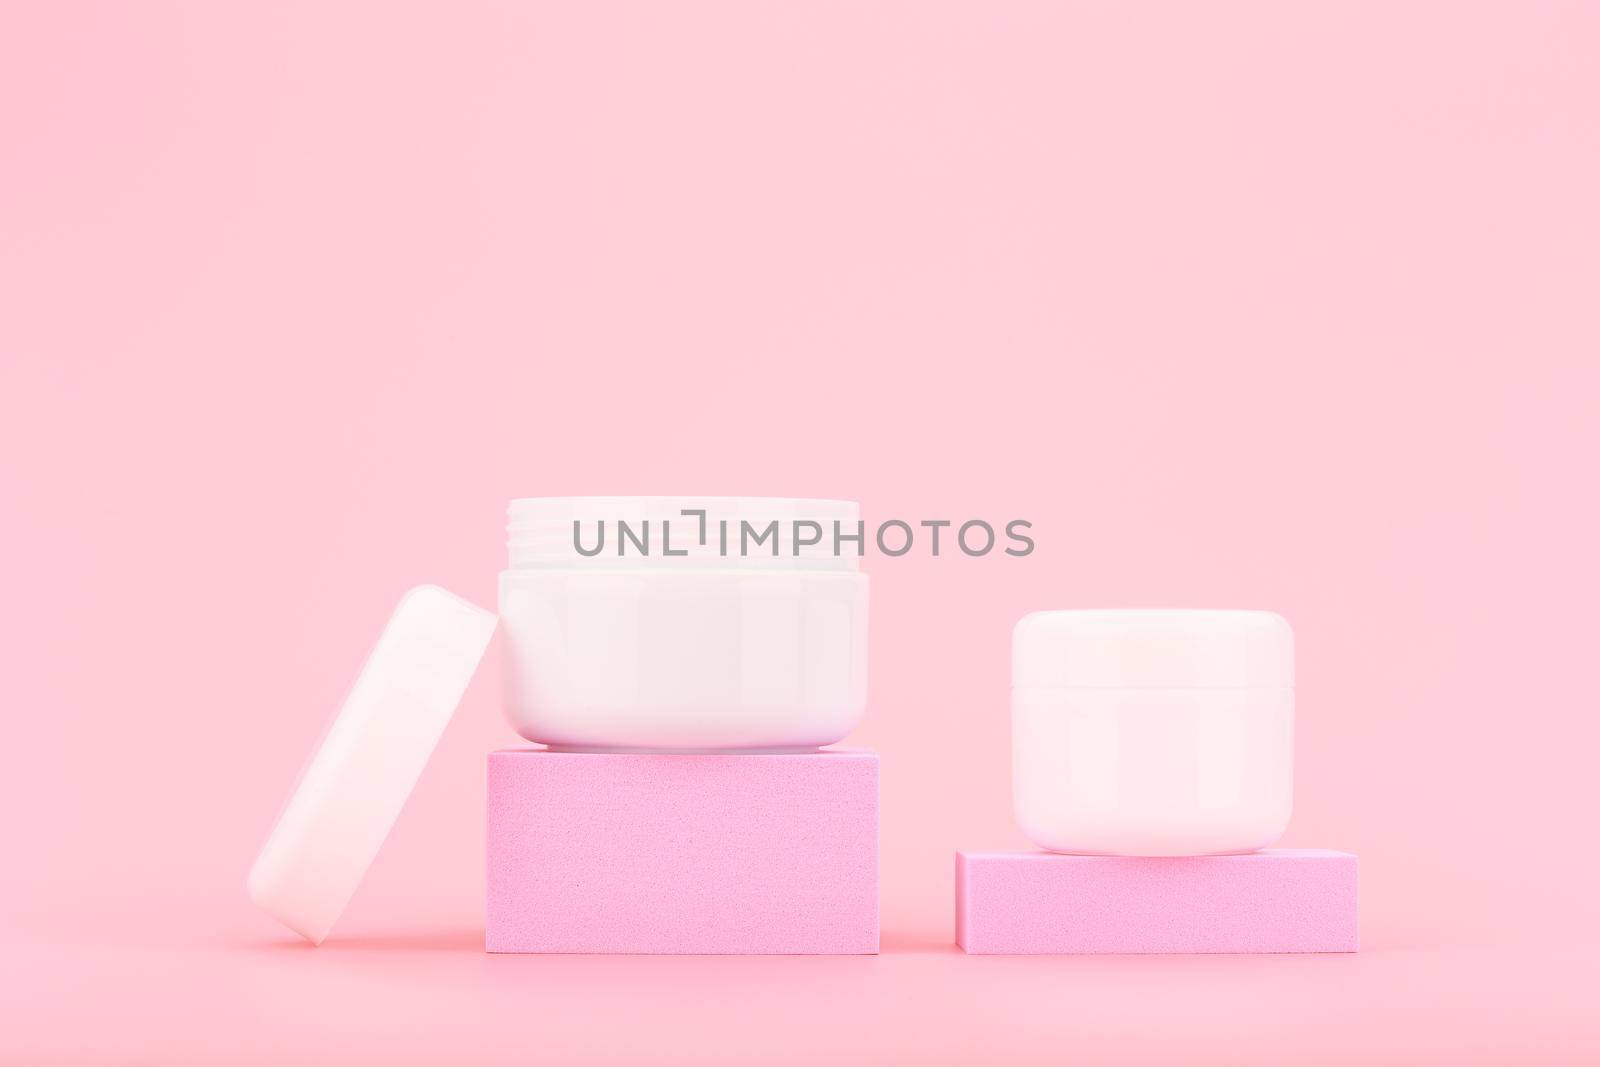 Two cosmetic cream containers on pink podiums against light pink background with copy space. Concept of beauty products for daily facial rituals or skin care routine